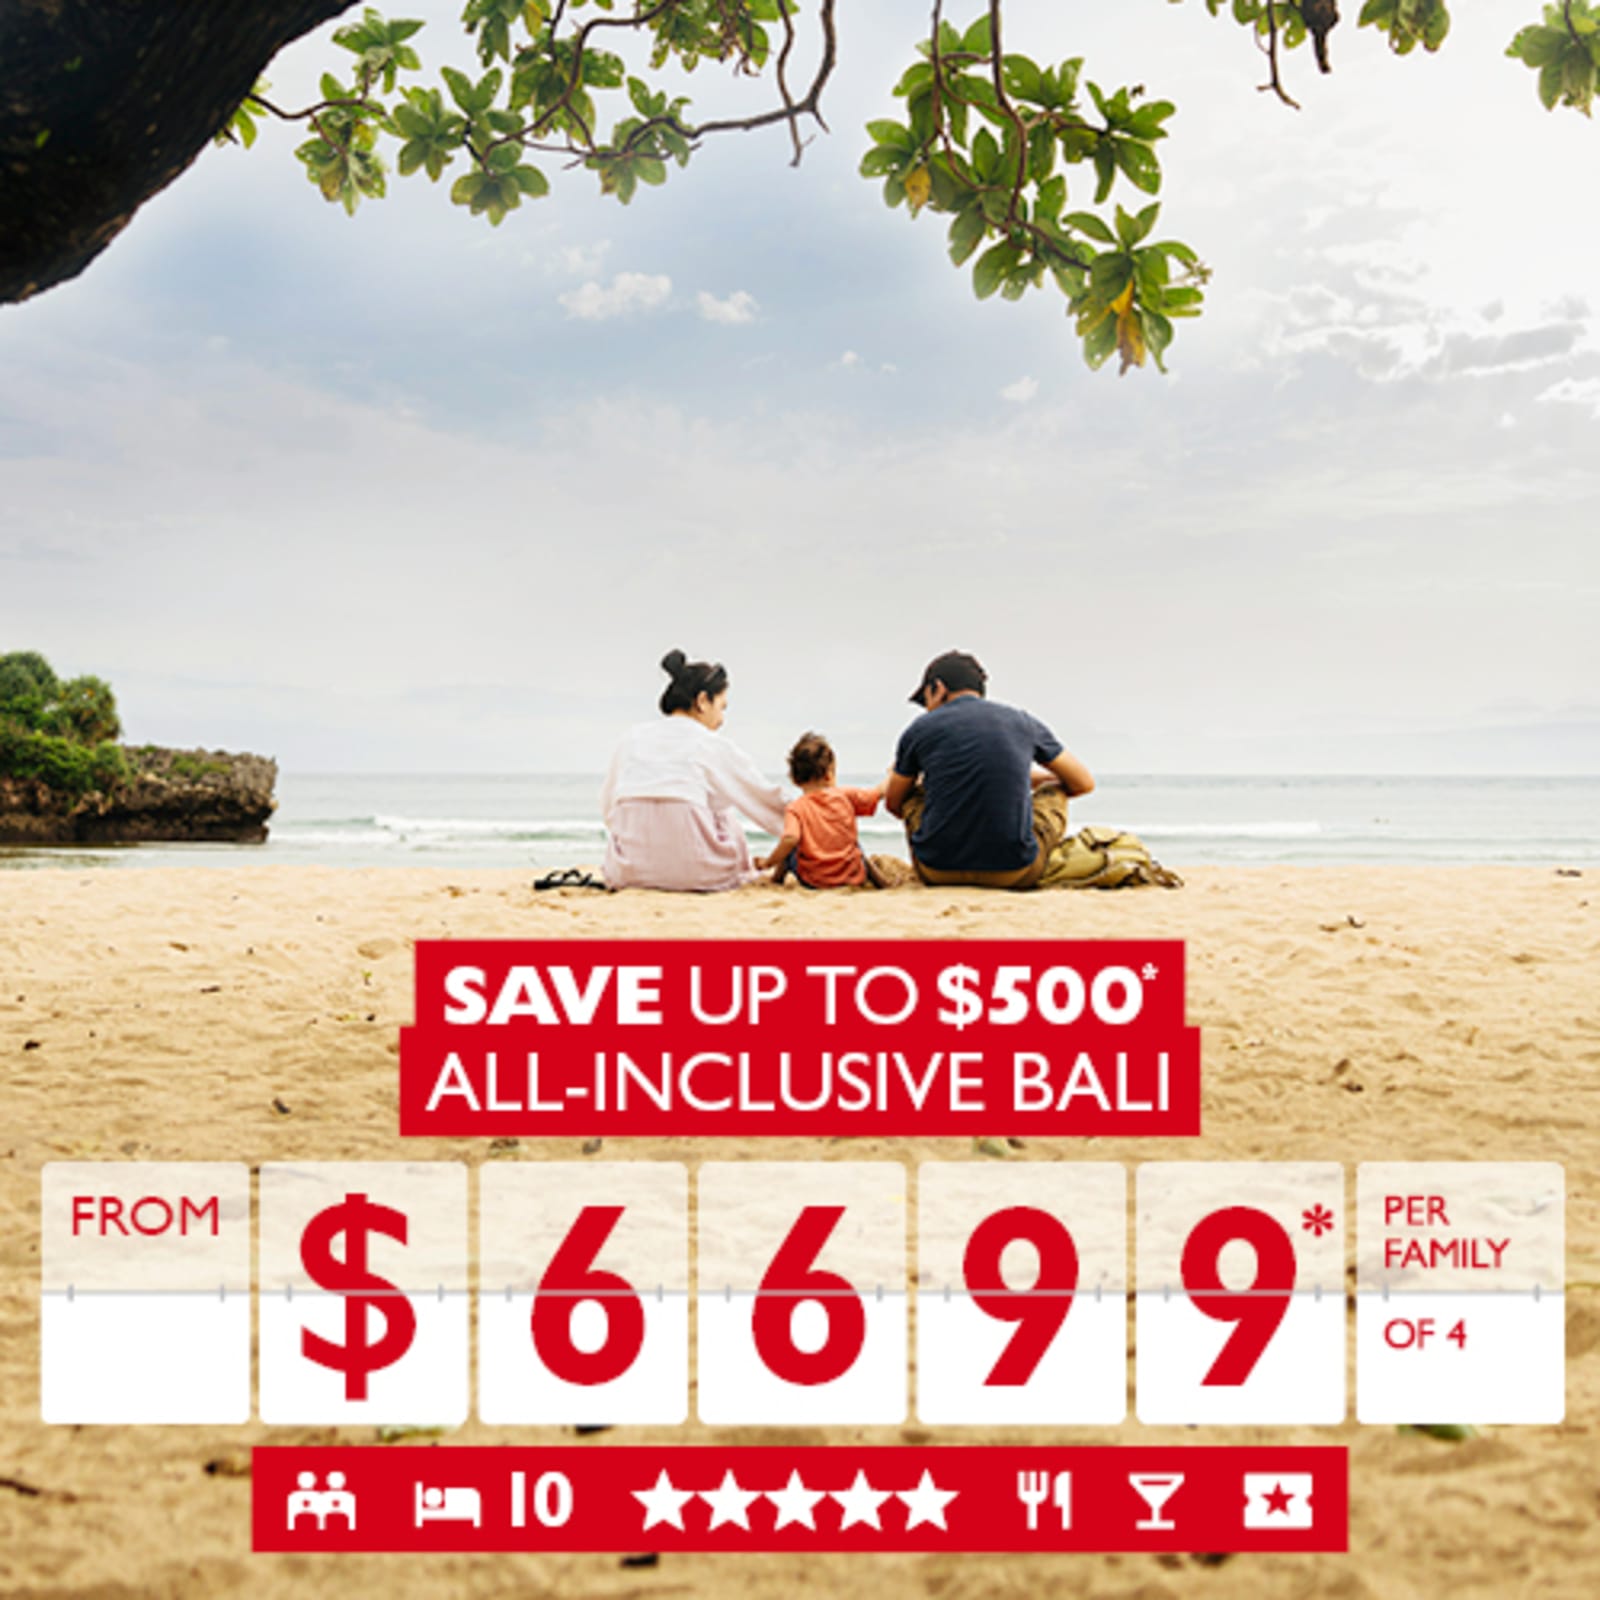 Save up to $500* All-inclusive Bali from $6699* per family of 4